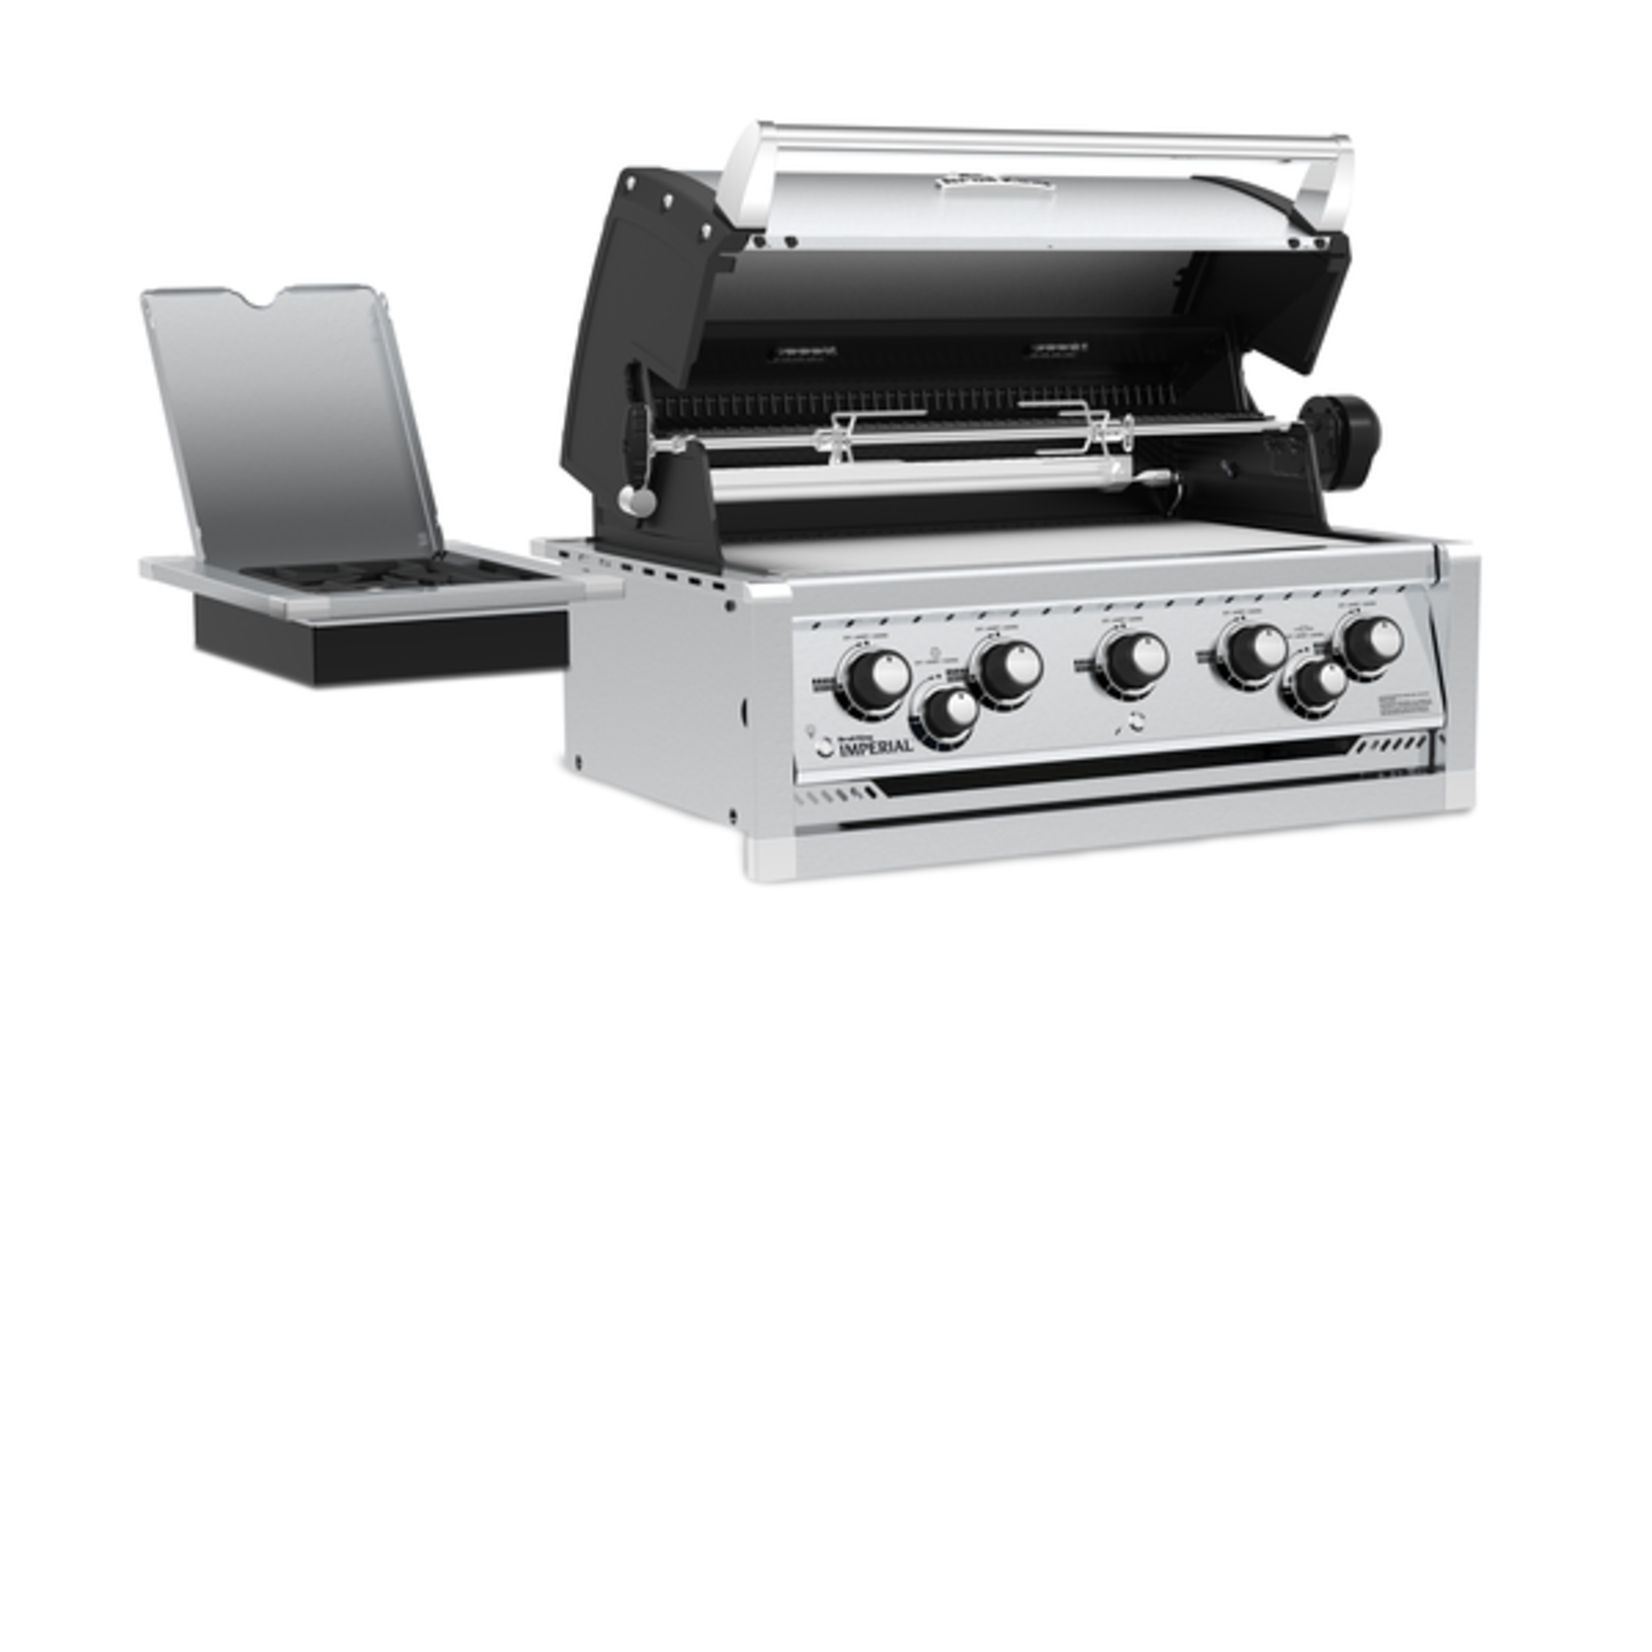 Broil King S590 Imperial - Built in Grill Head